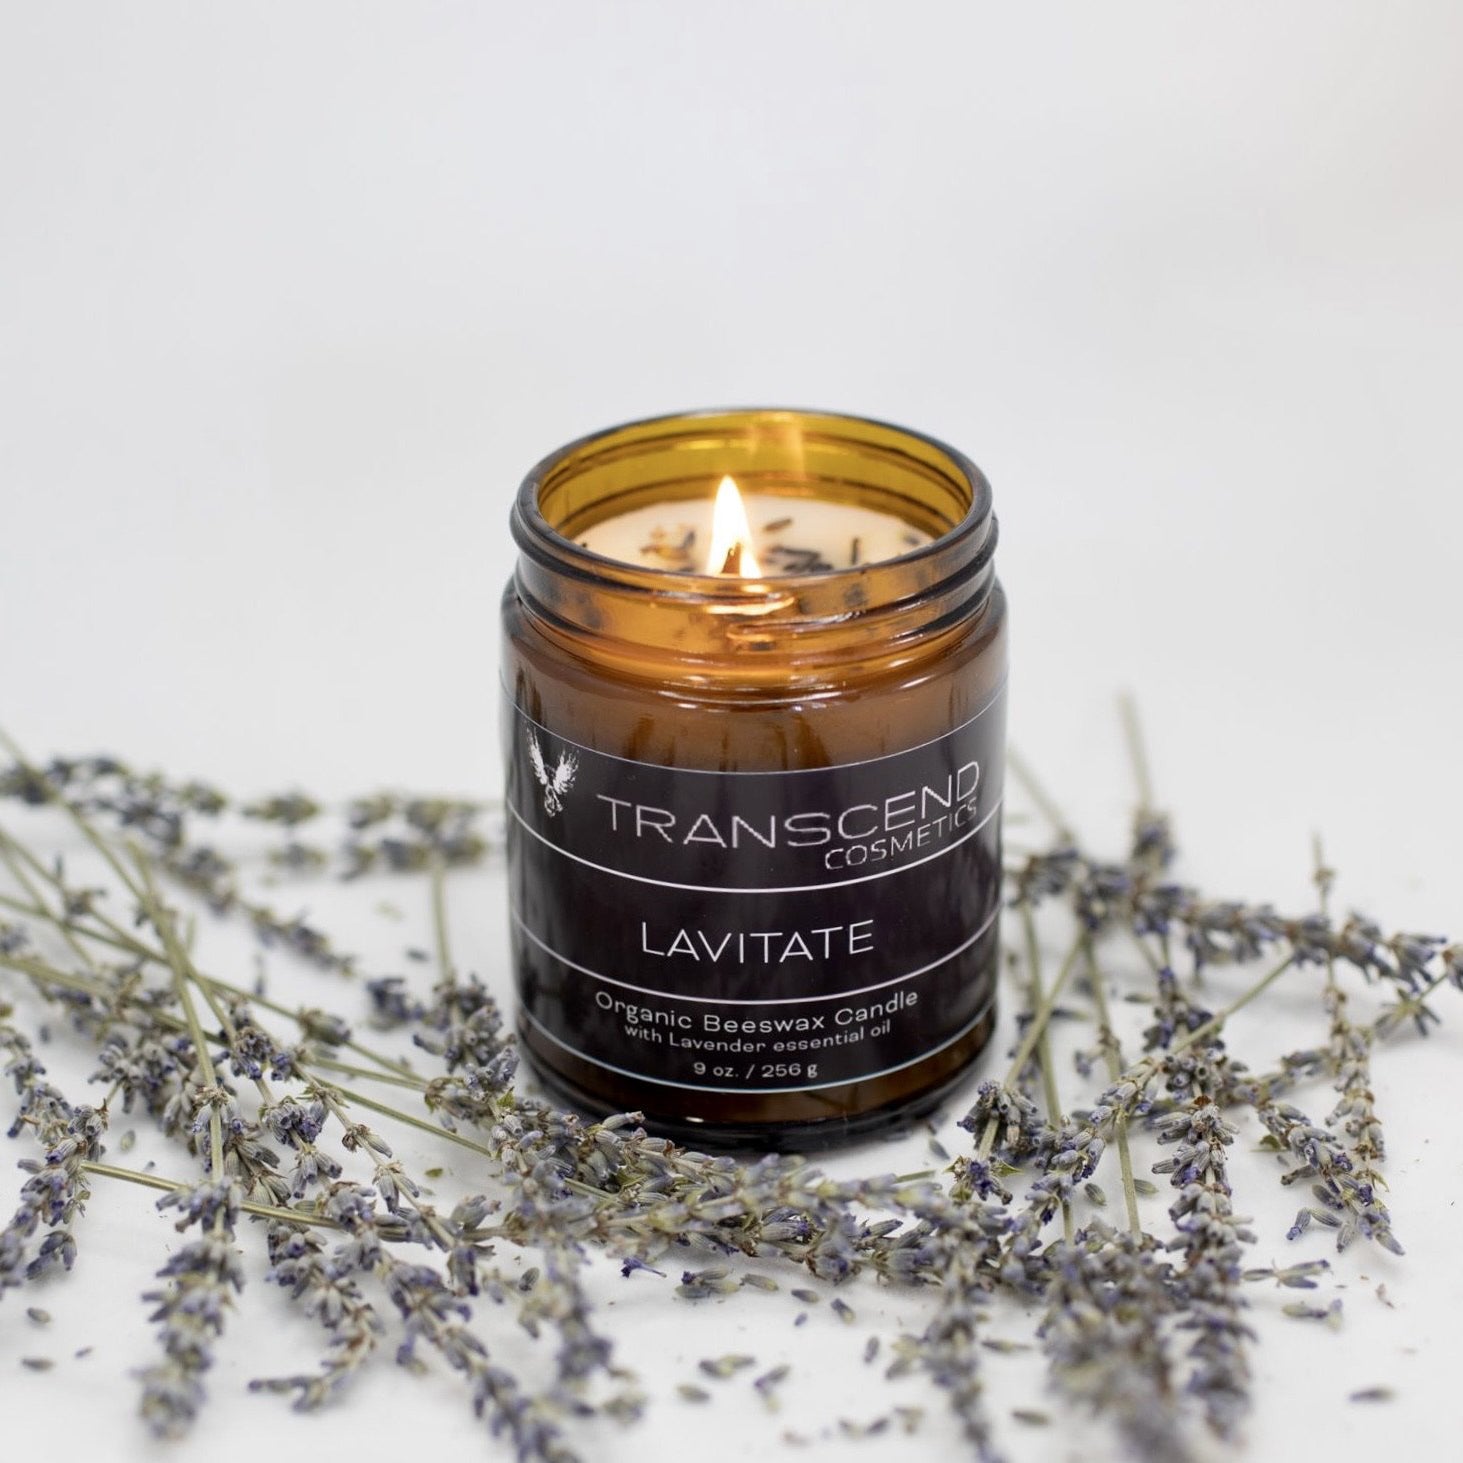 candle,lavender candles,lavender candle,lavender,candles,diy lavender candle,diy candles,lavender vanilla candle,how to make a lavender candle,diy candle,scented candles,candle making,lavender candle diy,lavendar candle,soy candles,diy lavendar candle,new spring 2019 lavender candle,how to make candles,homemade candles,lavender (color),candle recipe,beeswax candles,natural candles,red candles,beeswax candle recipe